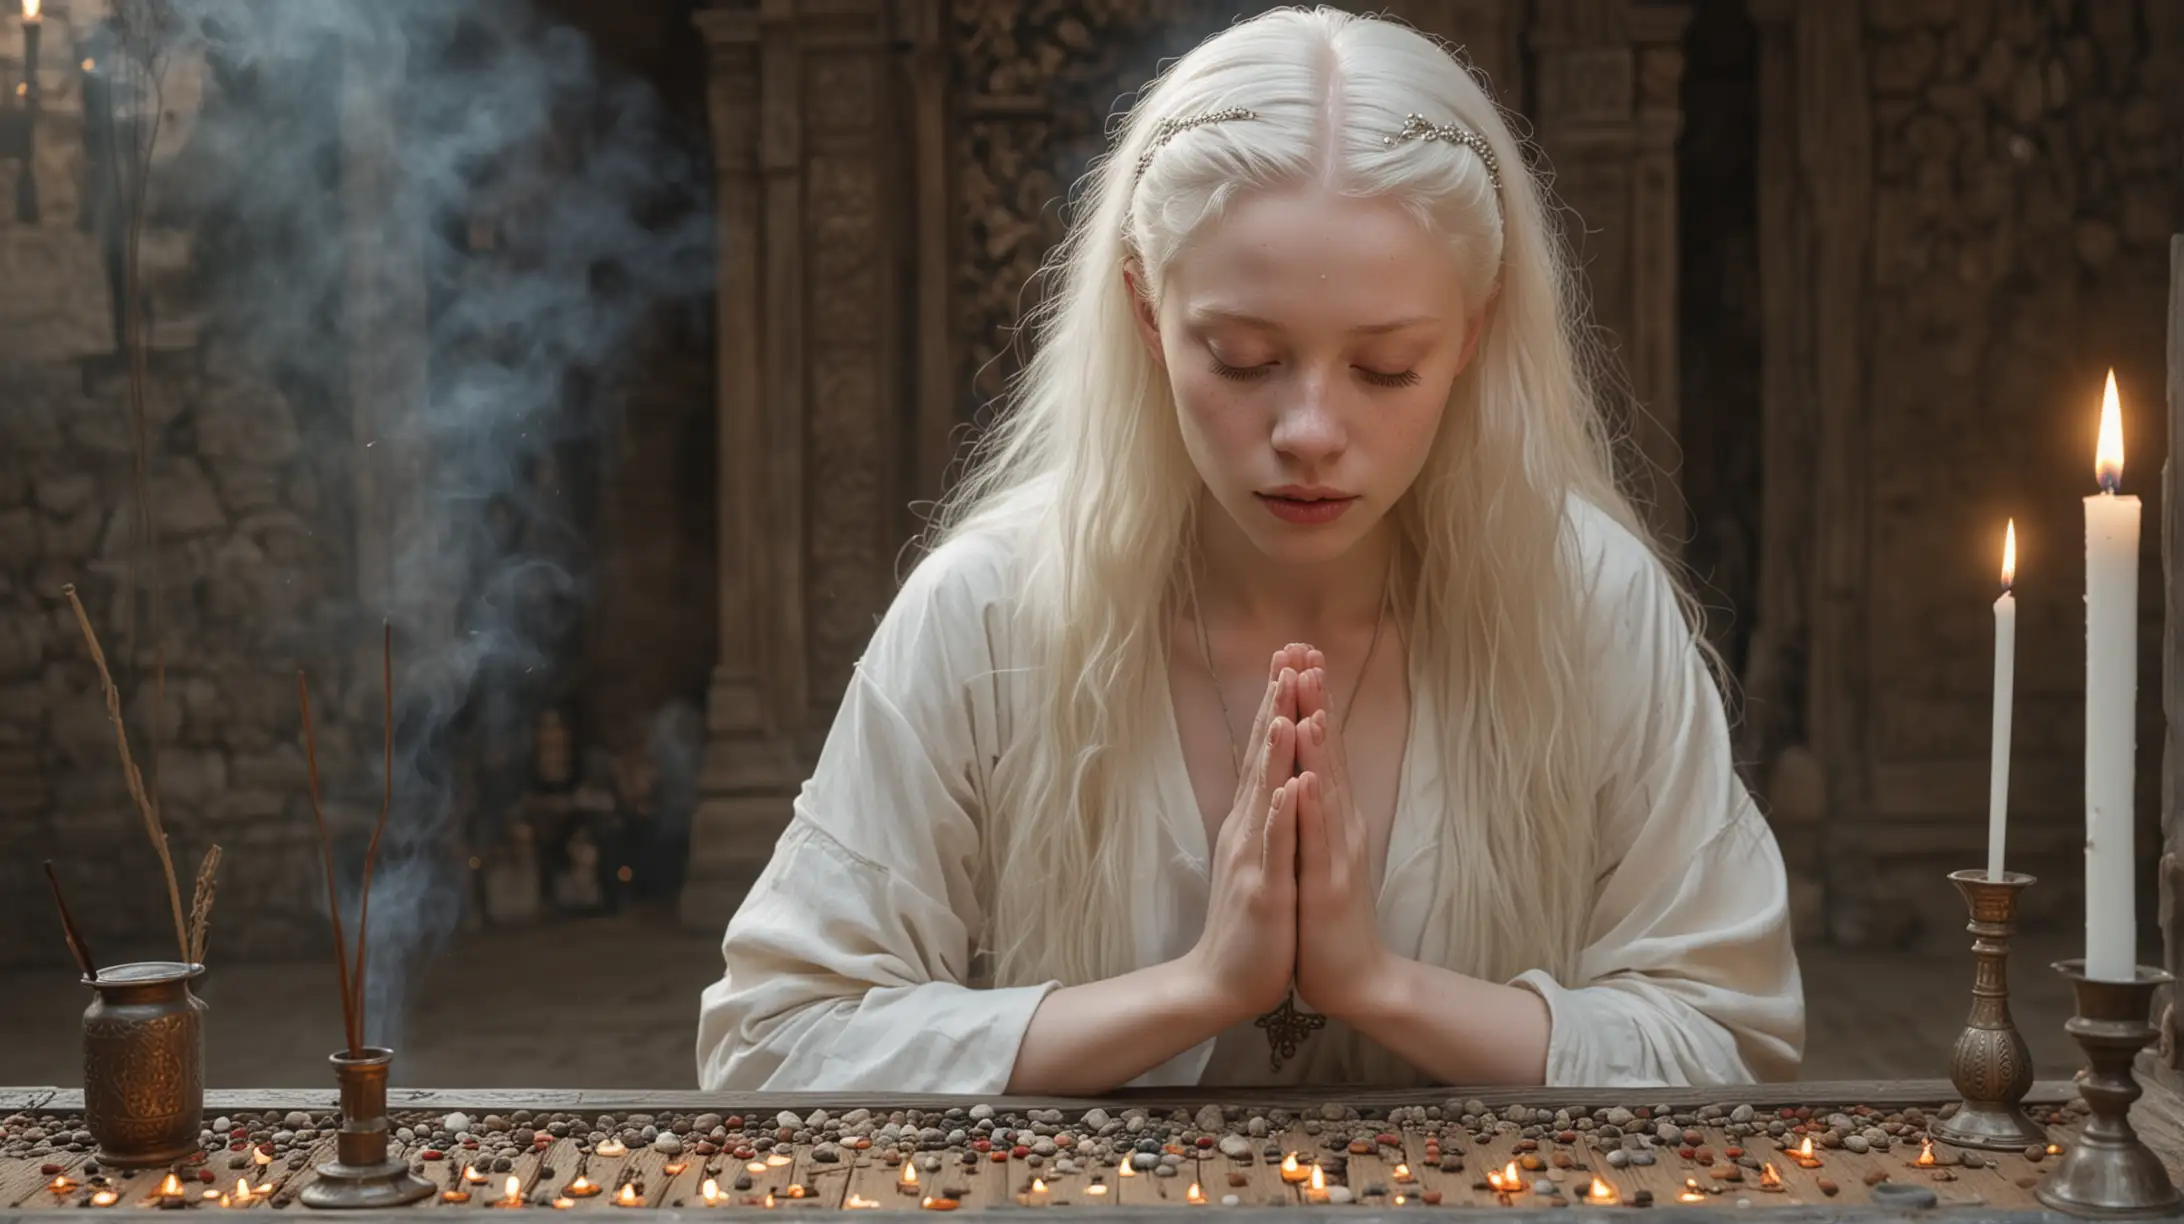 Young, silver-white haired albino beauty, freckled and pale, praying by an incense lit alter, back turned, medieval setting